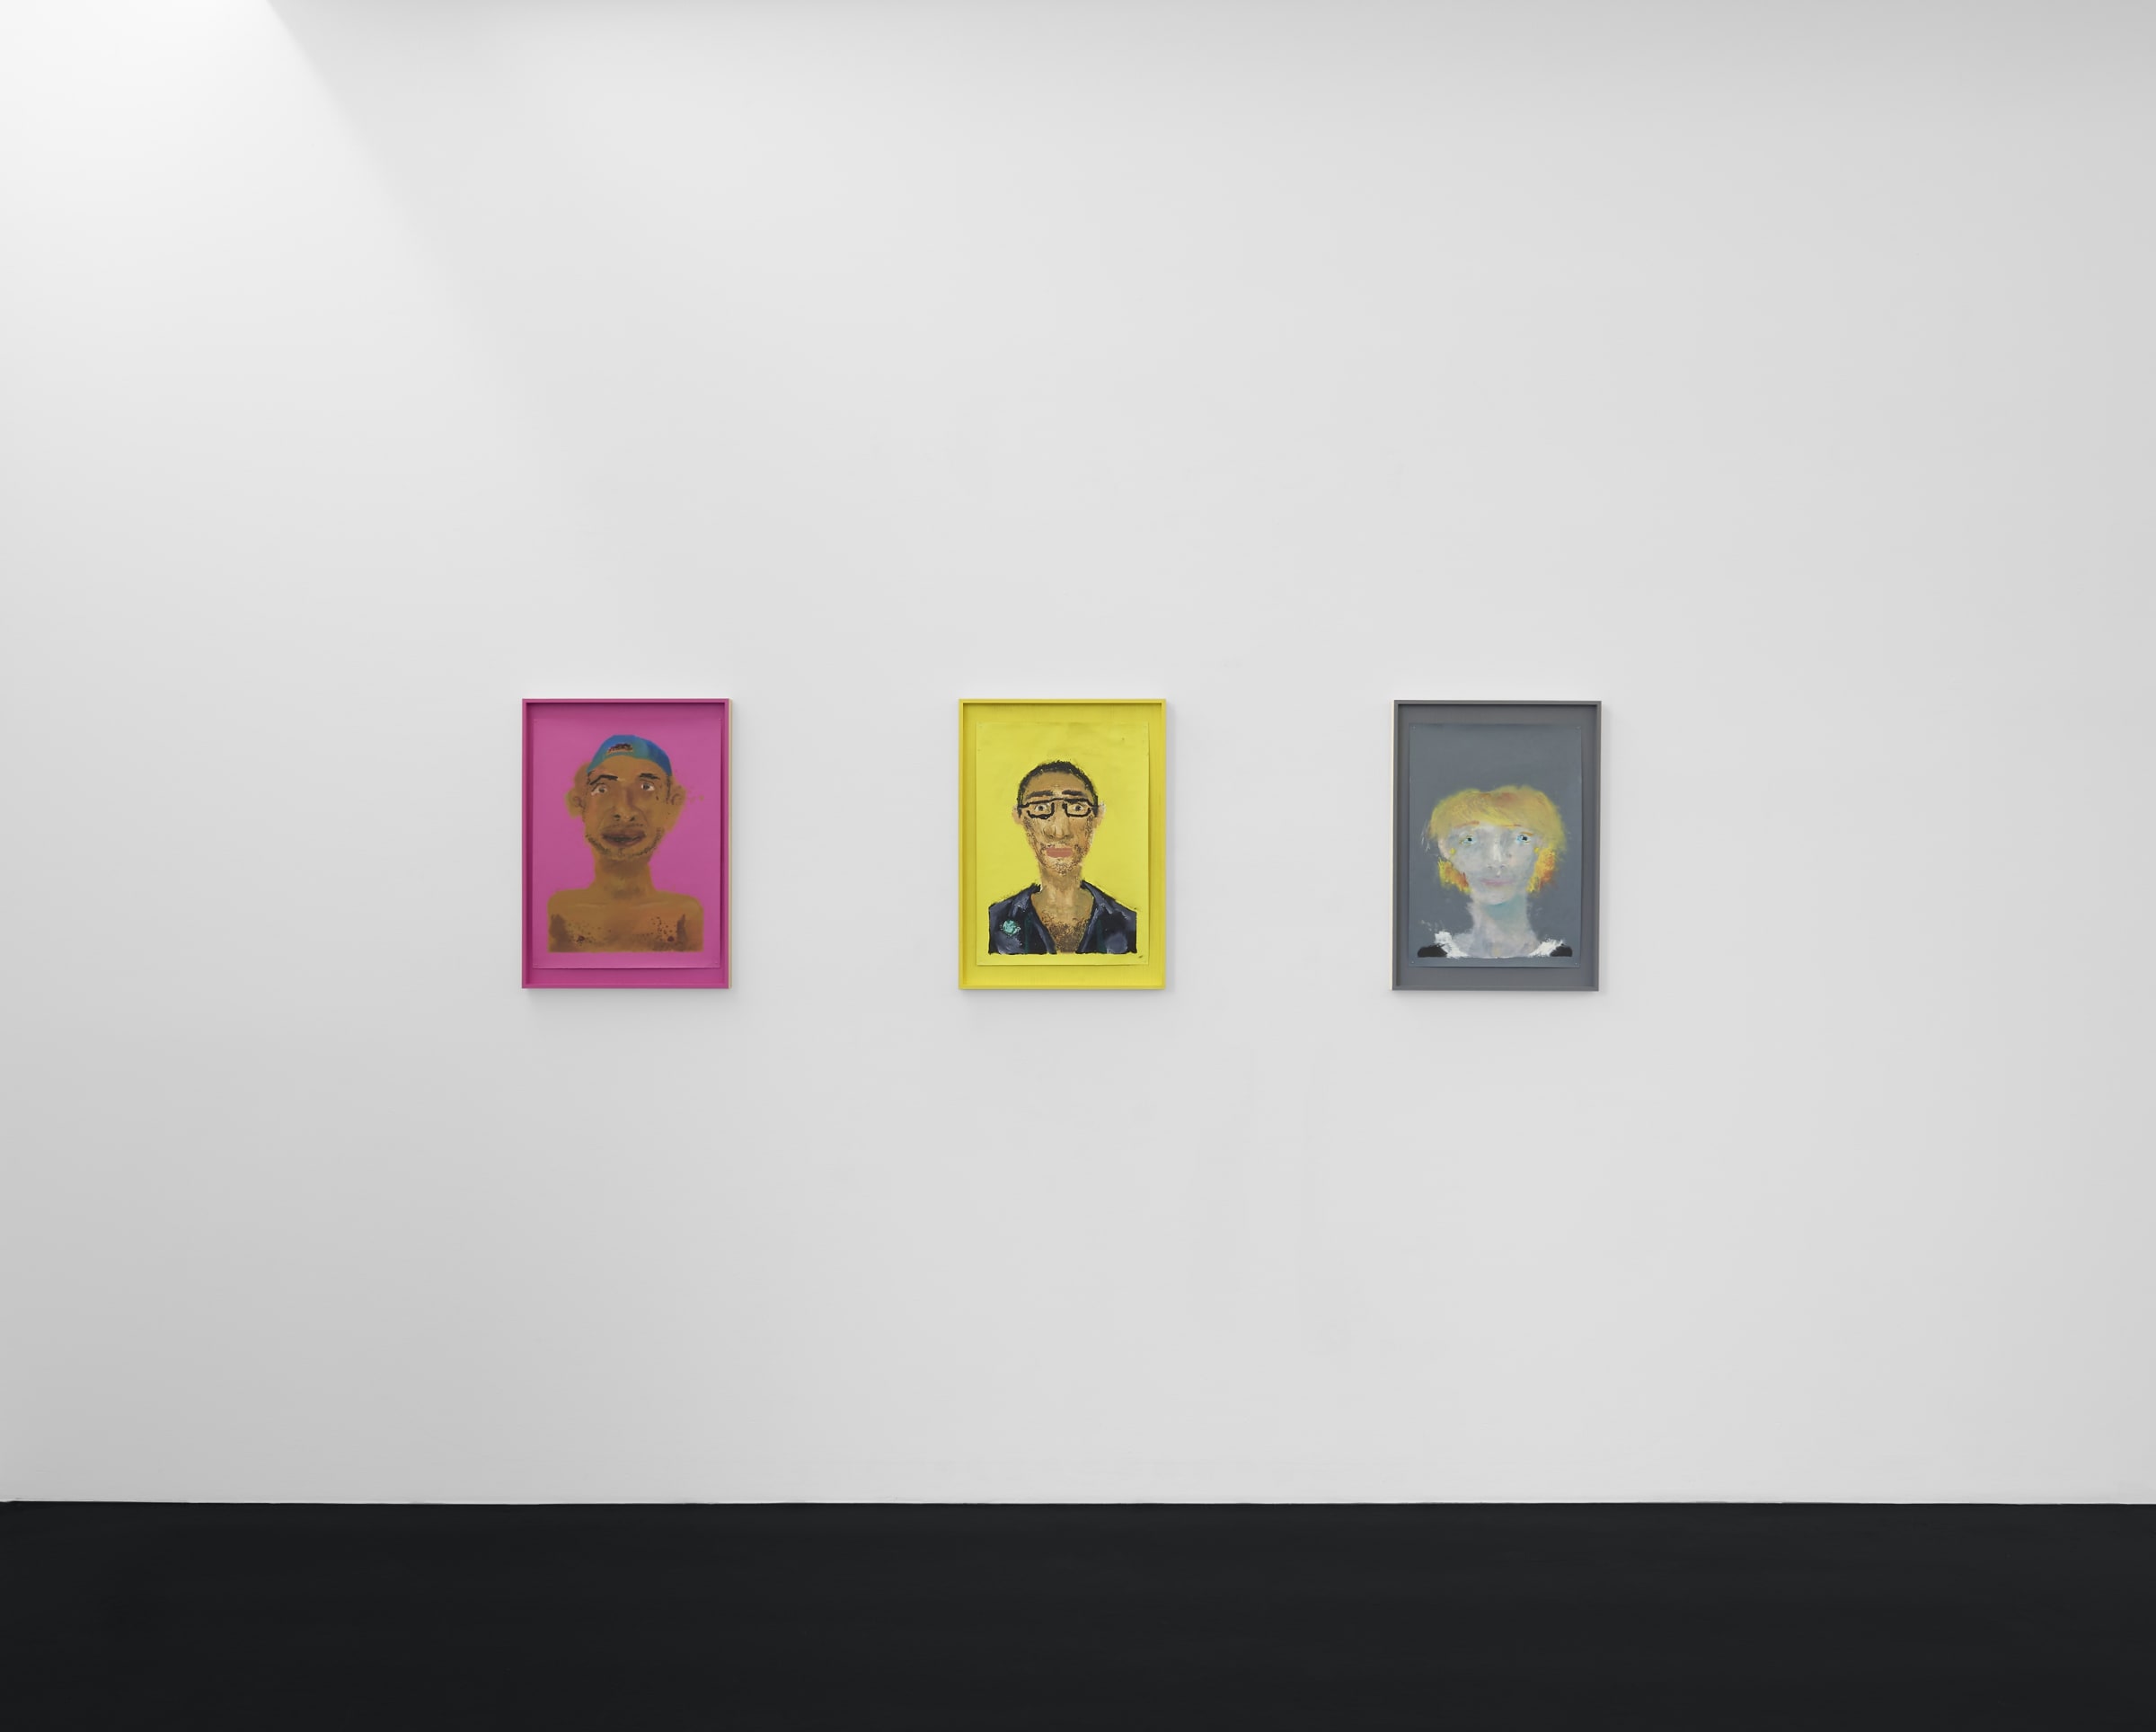 Manuel Solano Portraits Installation View September 13 – October 25, 2019 Peres Projects, BerlinPhotographed by: Matthias Kolb